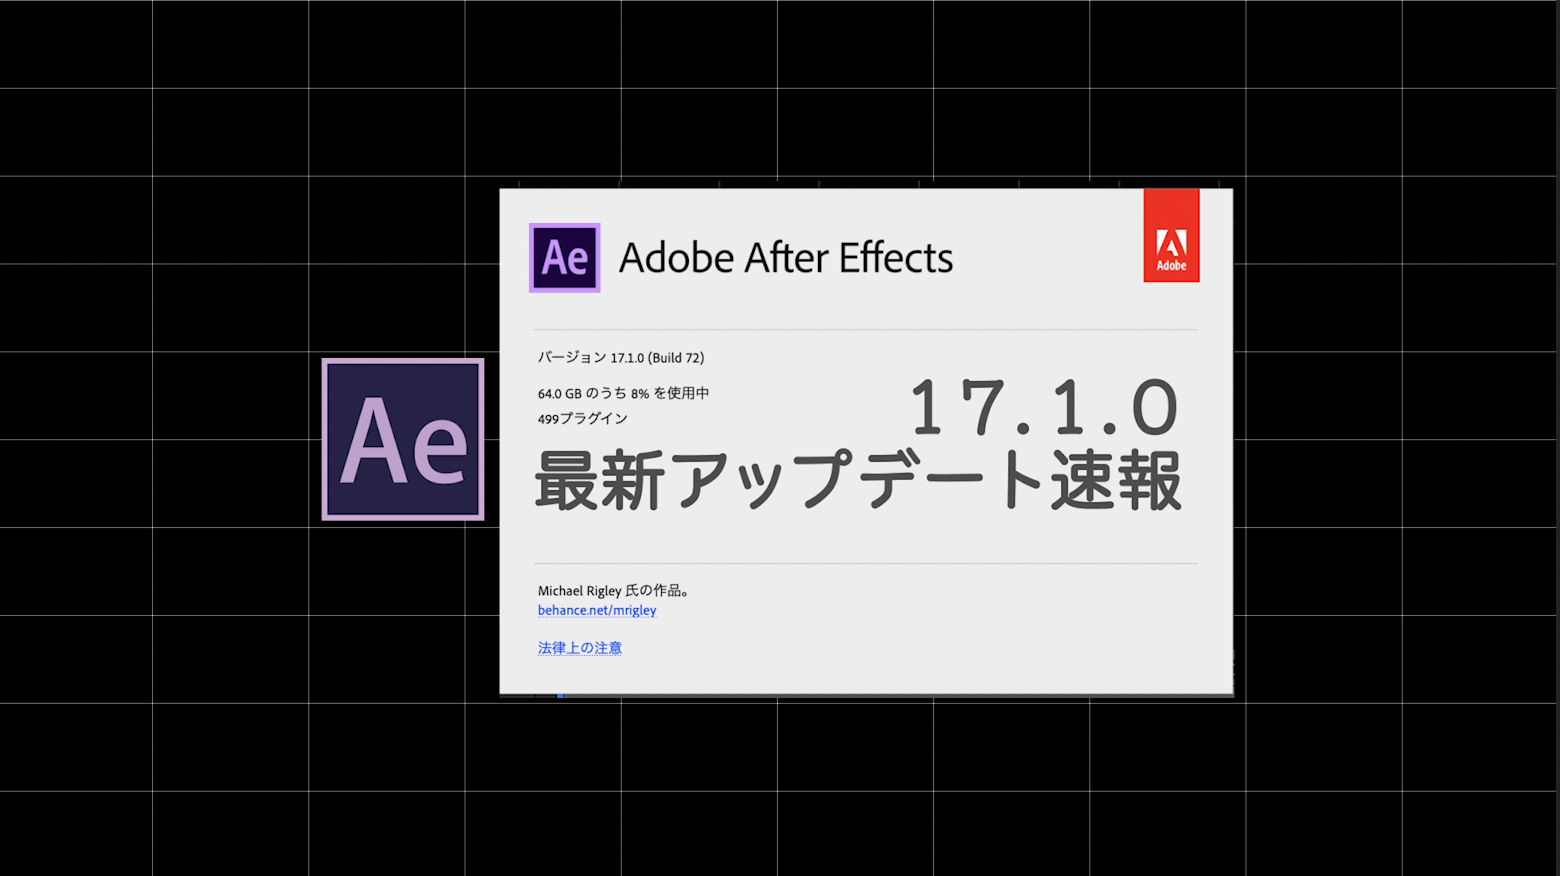 [After Effects]17.1.0アップデート内容詳細